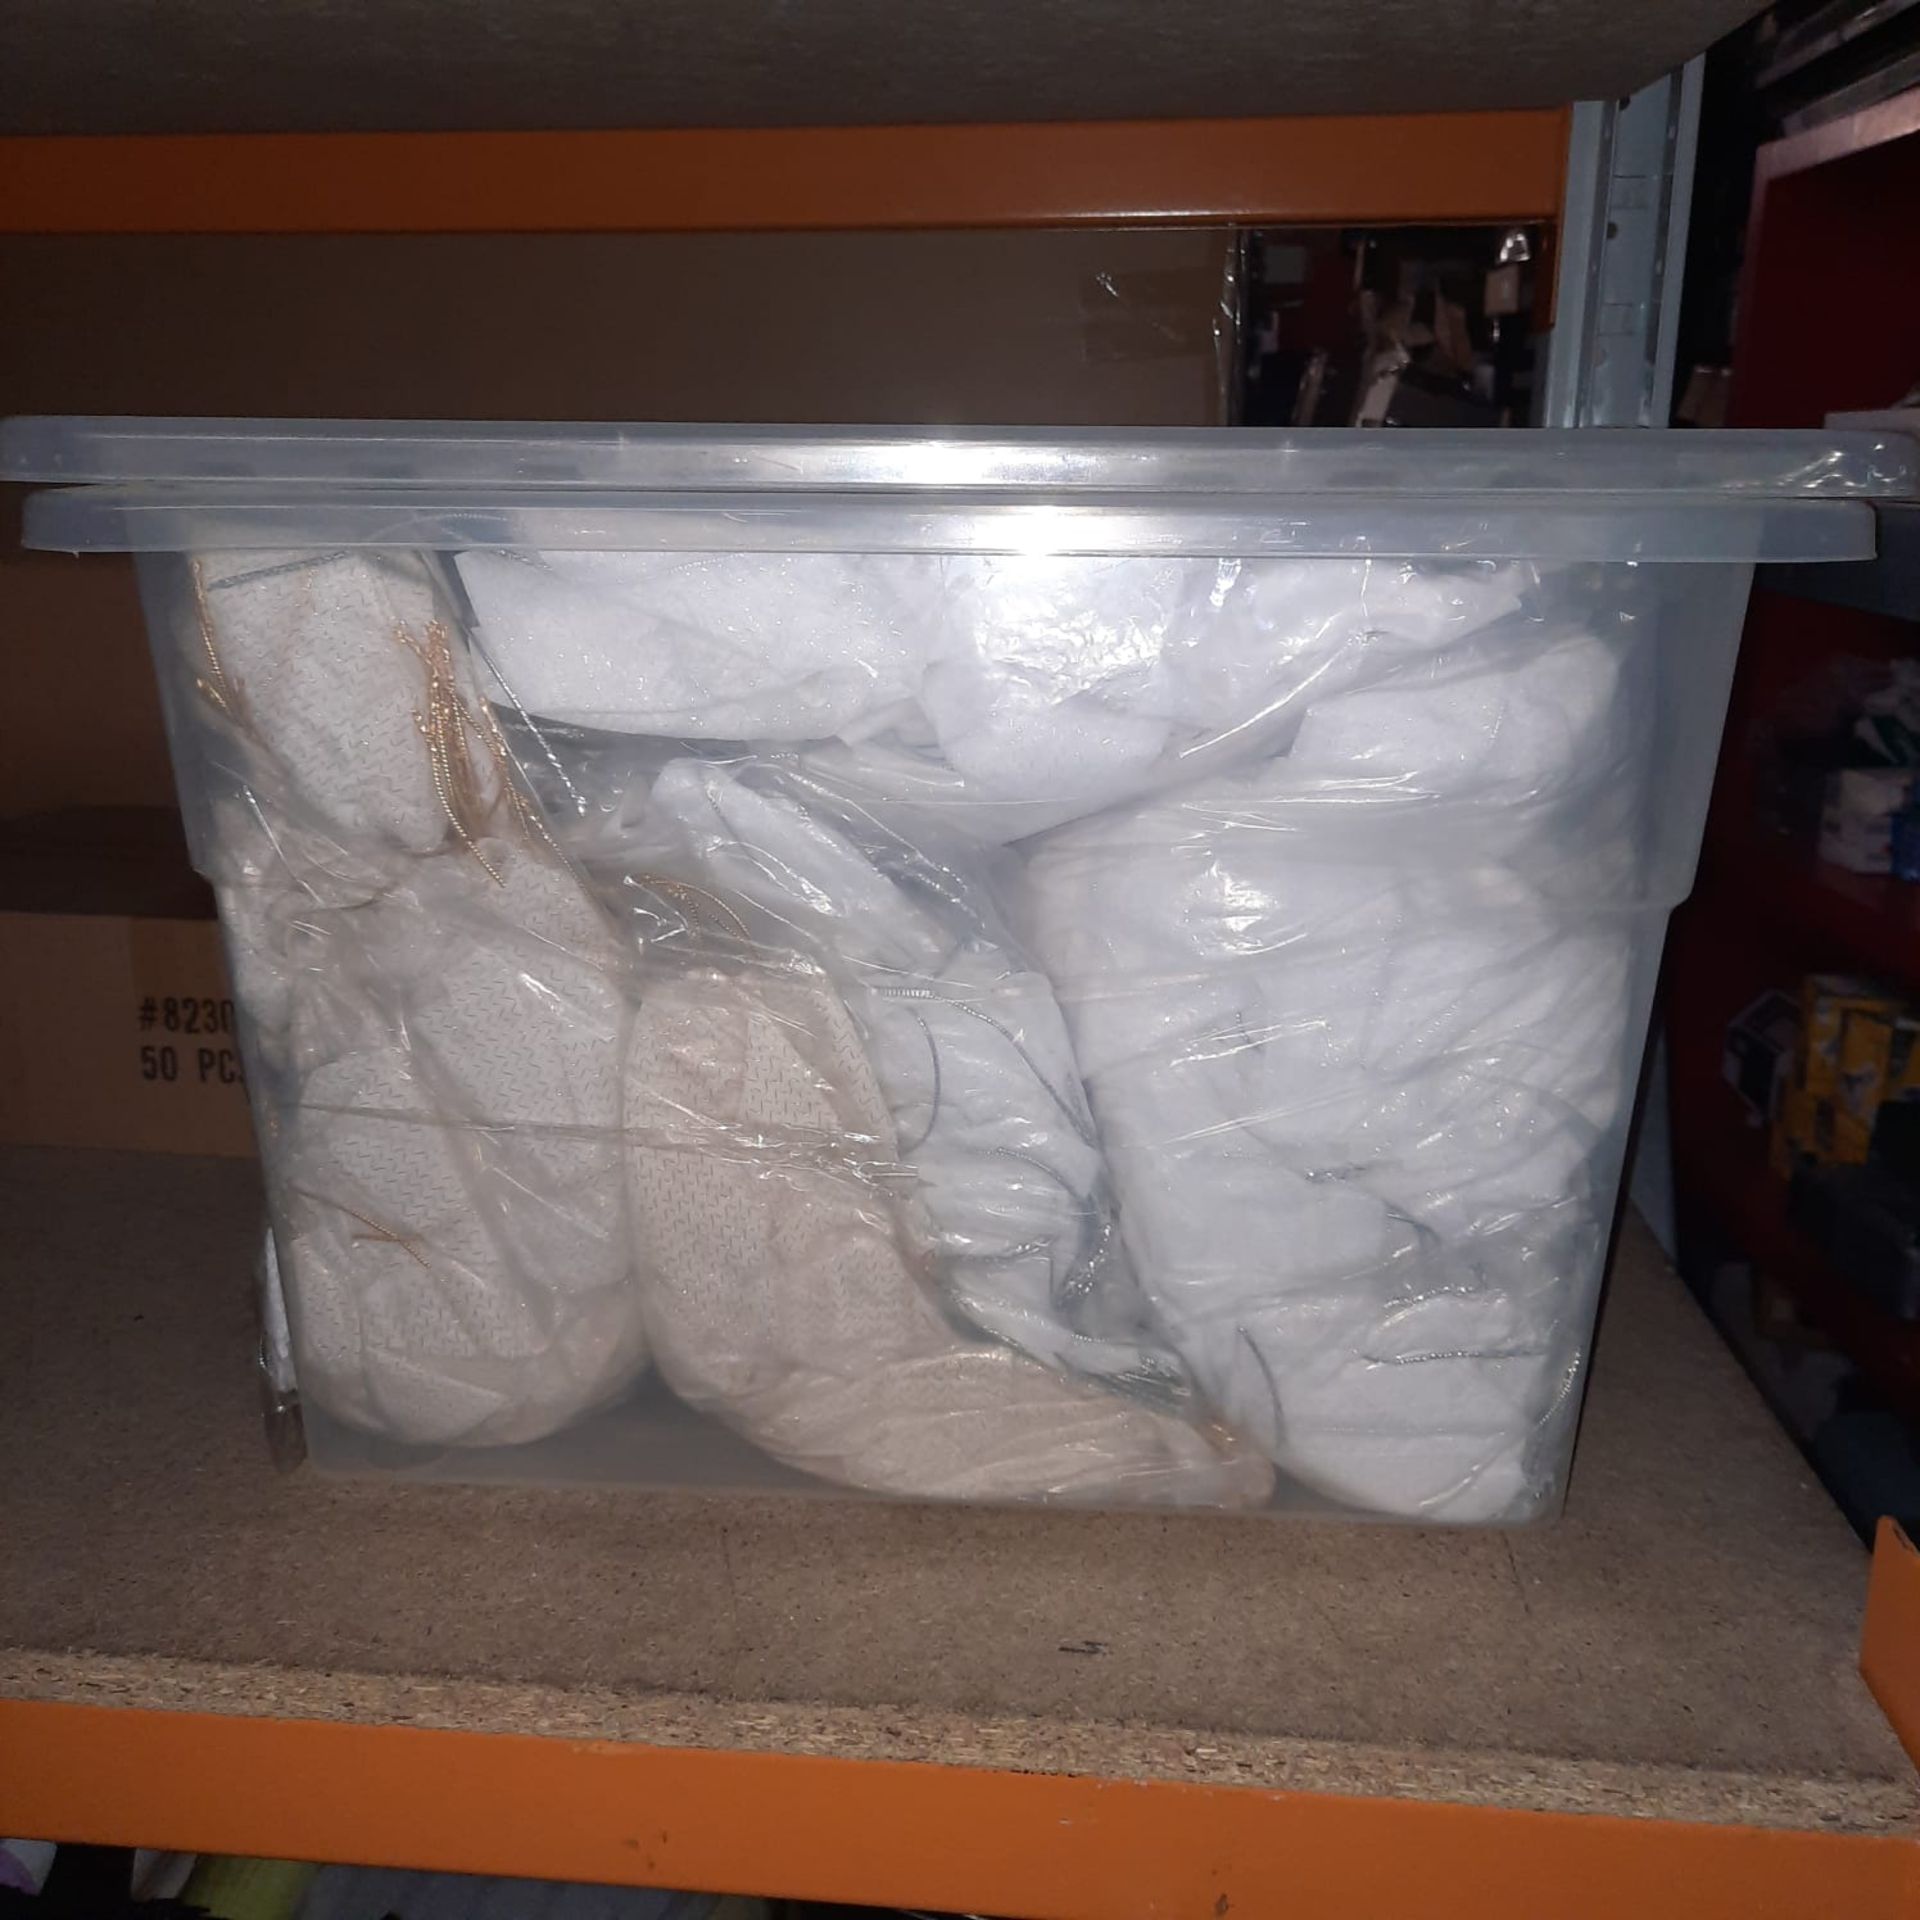 SEE IMAGE. LARGE QUANTITY OF ORGANZA BAGS, THE CRATE IS NOT INCLUIDED - SALEROOM ON TOP OF RACK (